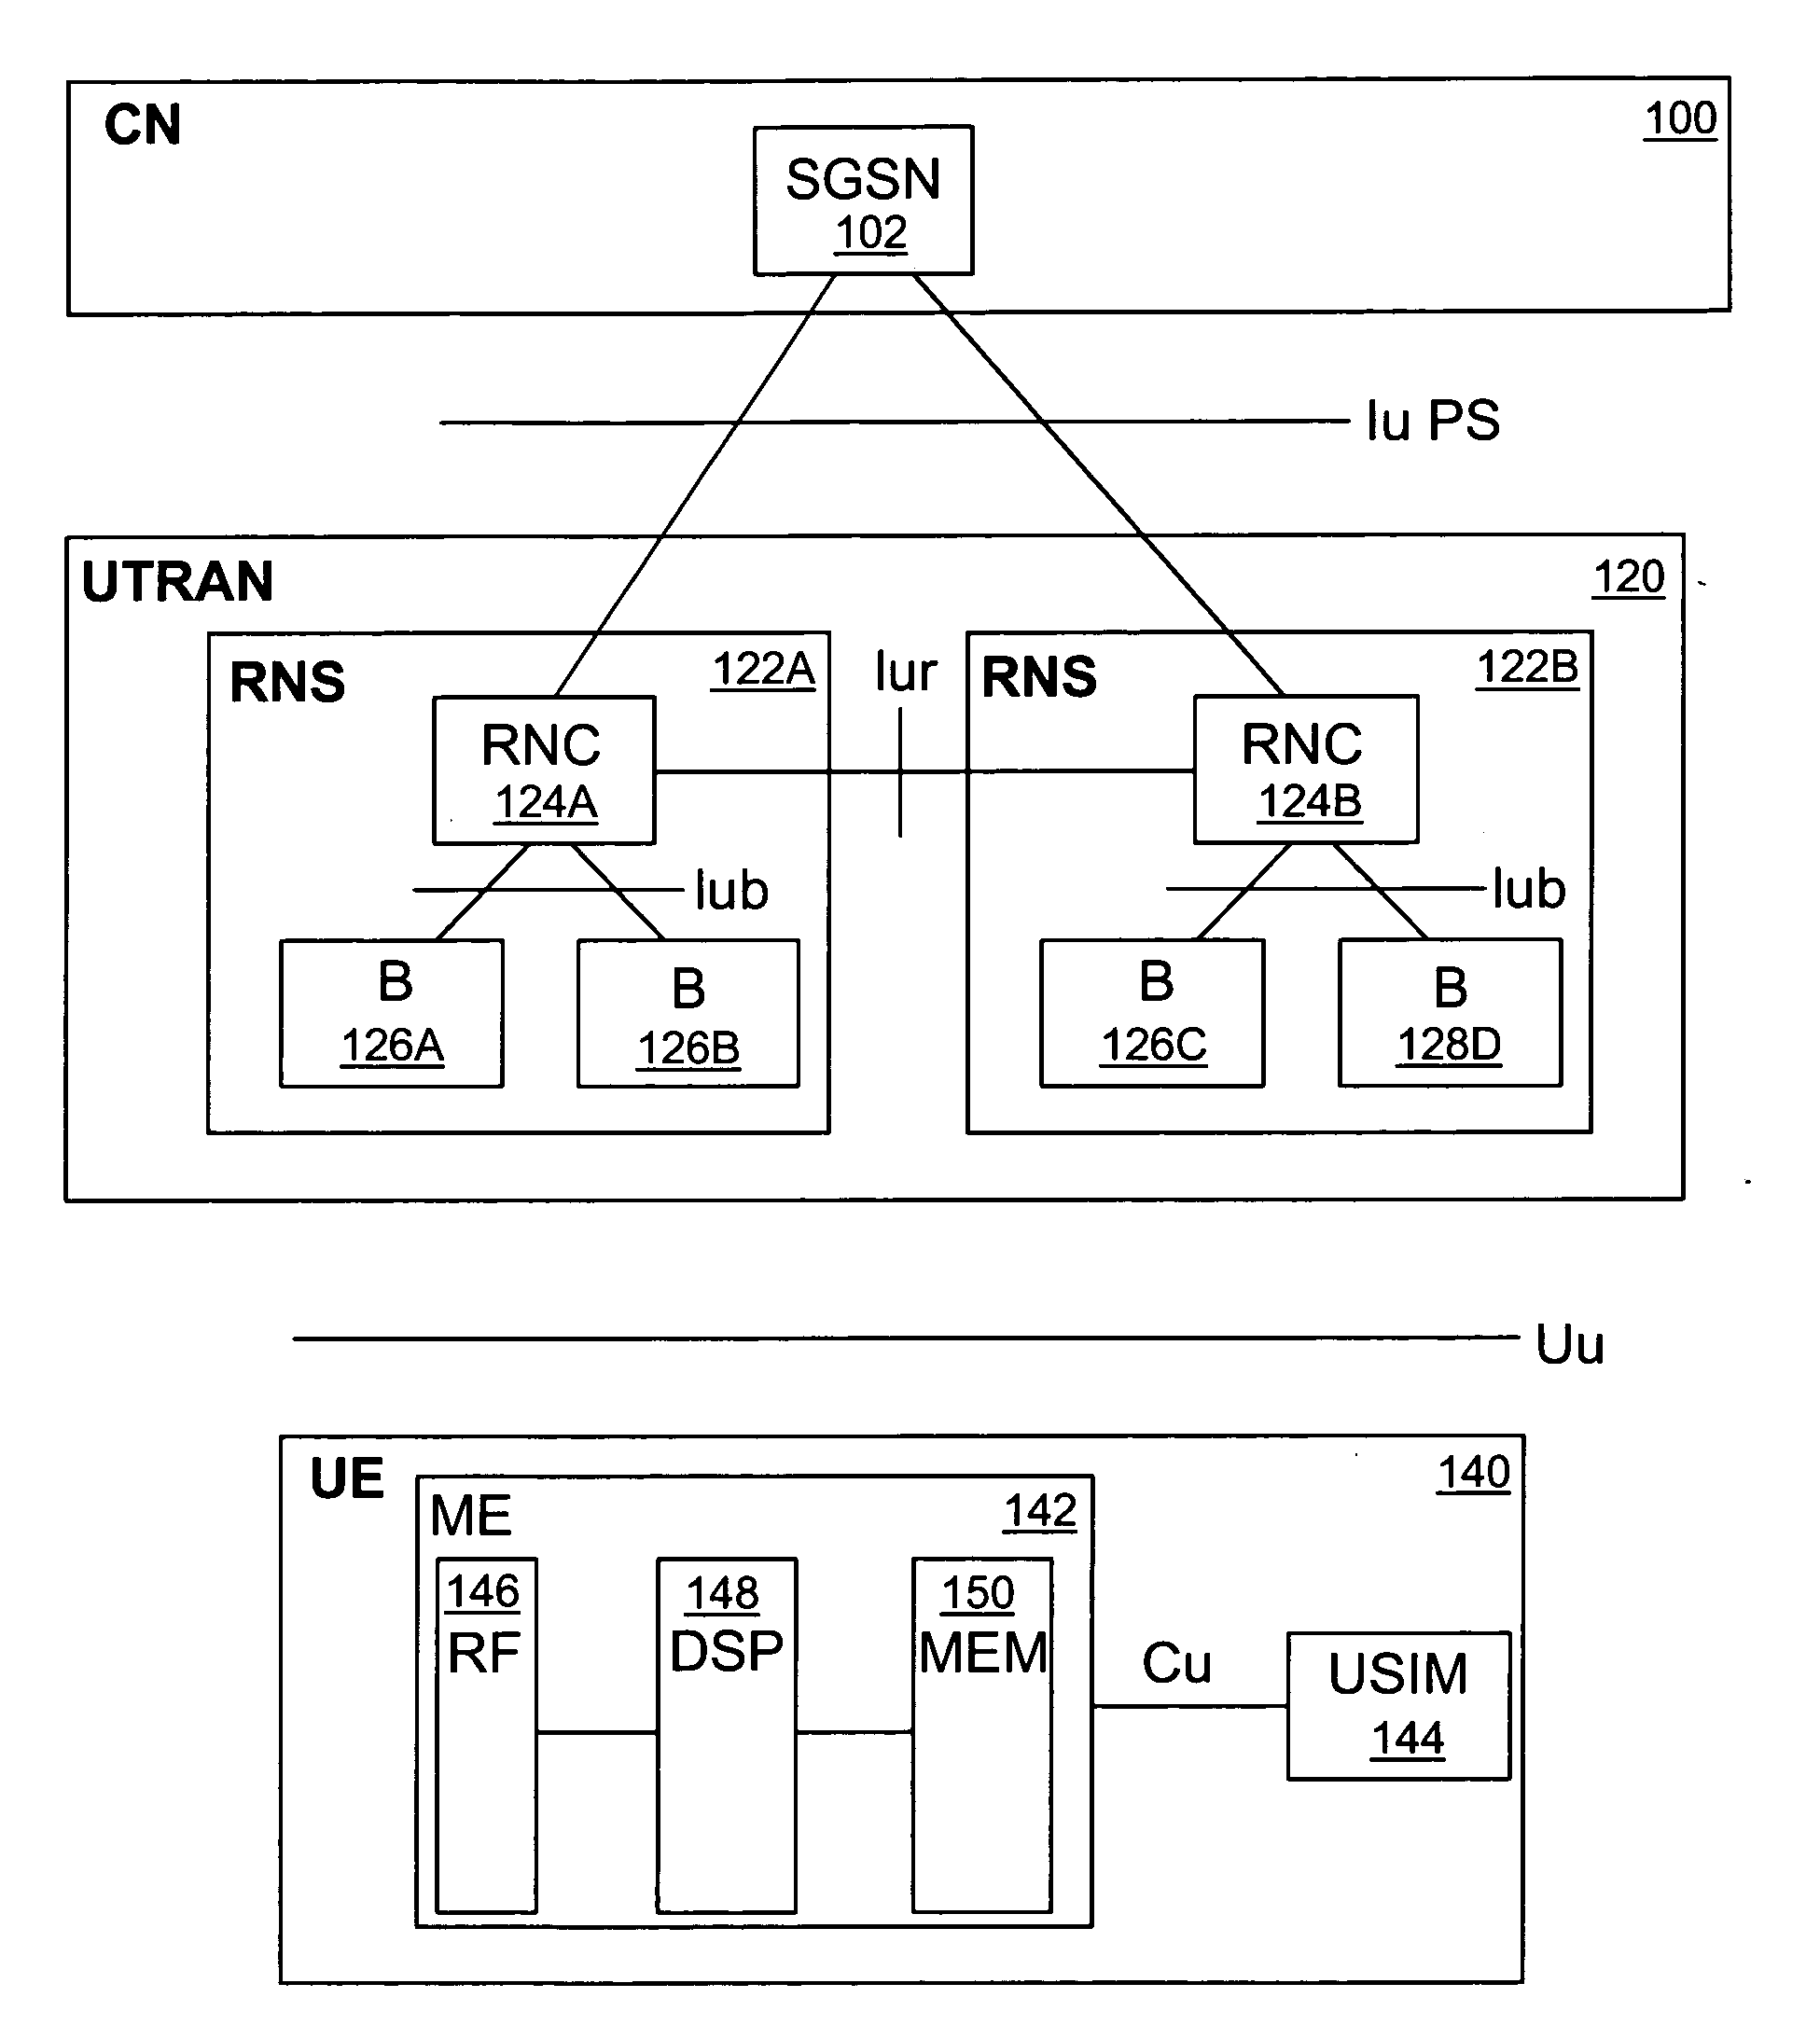 Power control of packet data transmission in cellular network